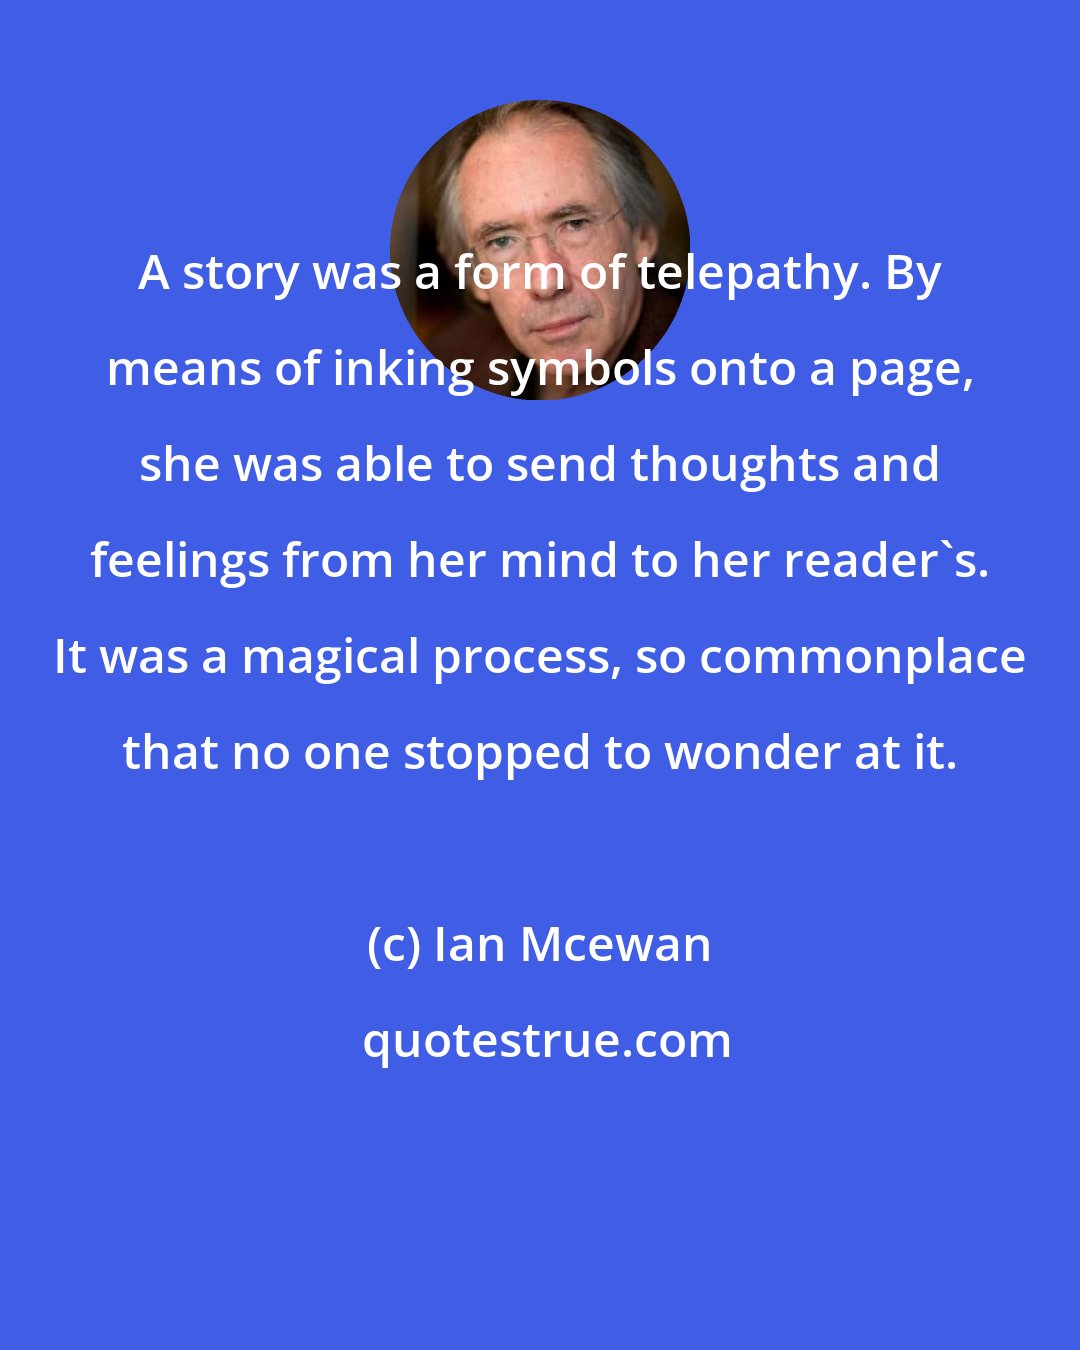 Ian Mcewan: A story was a form of telepathy. By means of inking symbols onto a page, she was able to send thoughts and feelings from her mind to her reader's. It was a magical process, so commonplace that no one stopped to wonder at it.